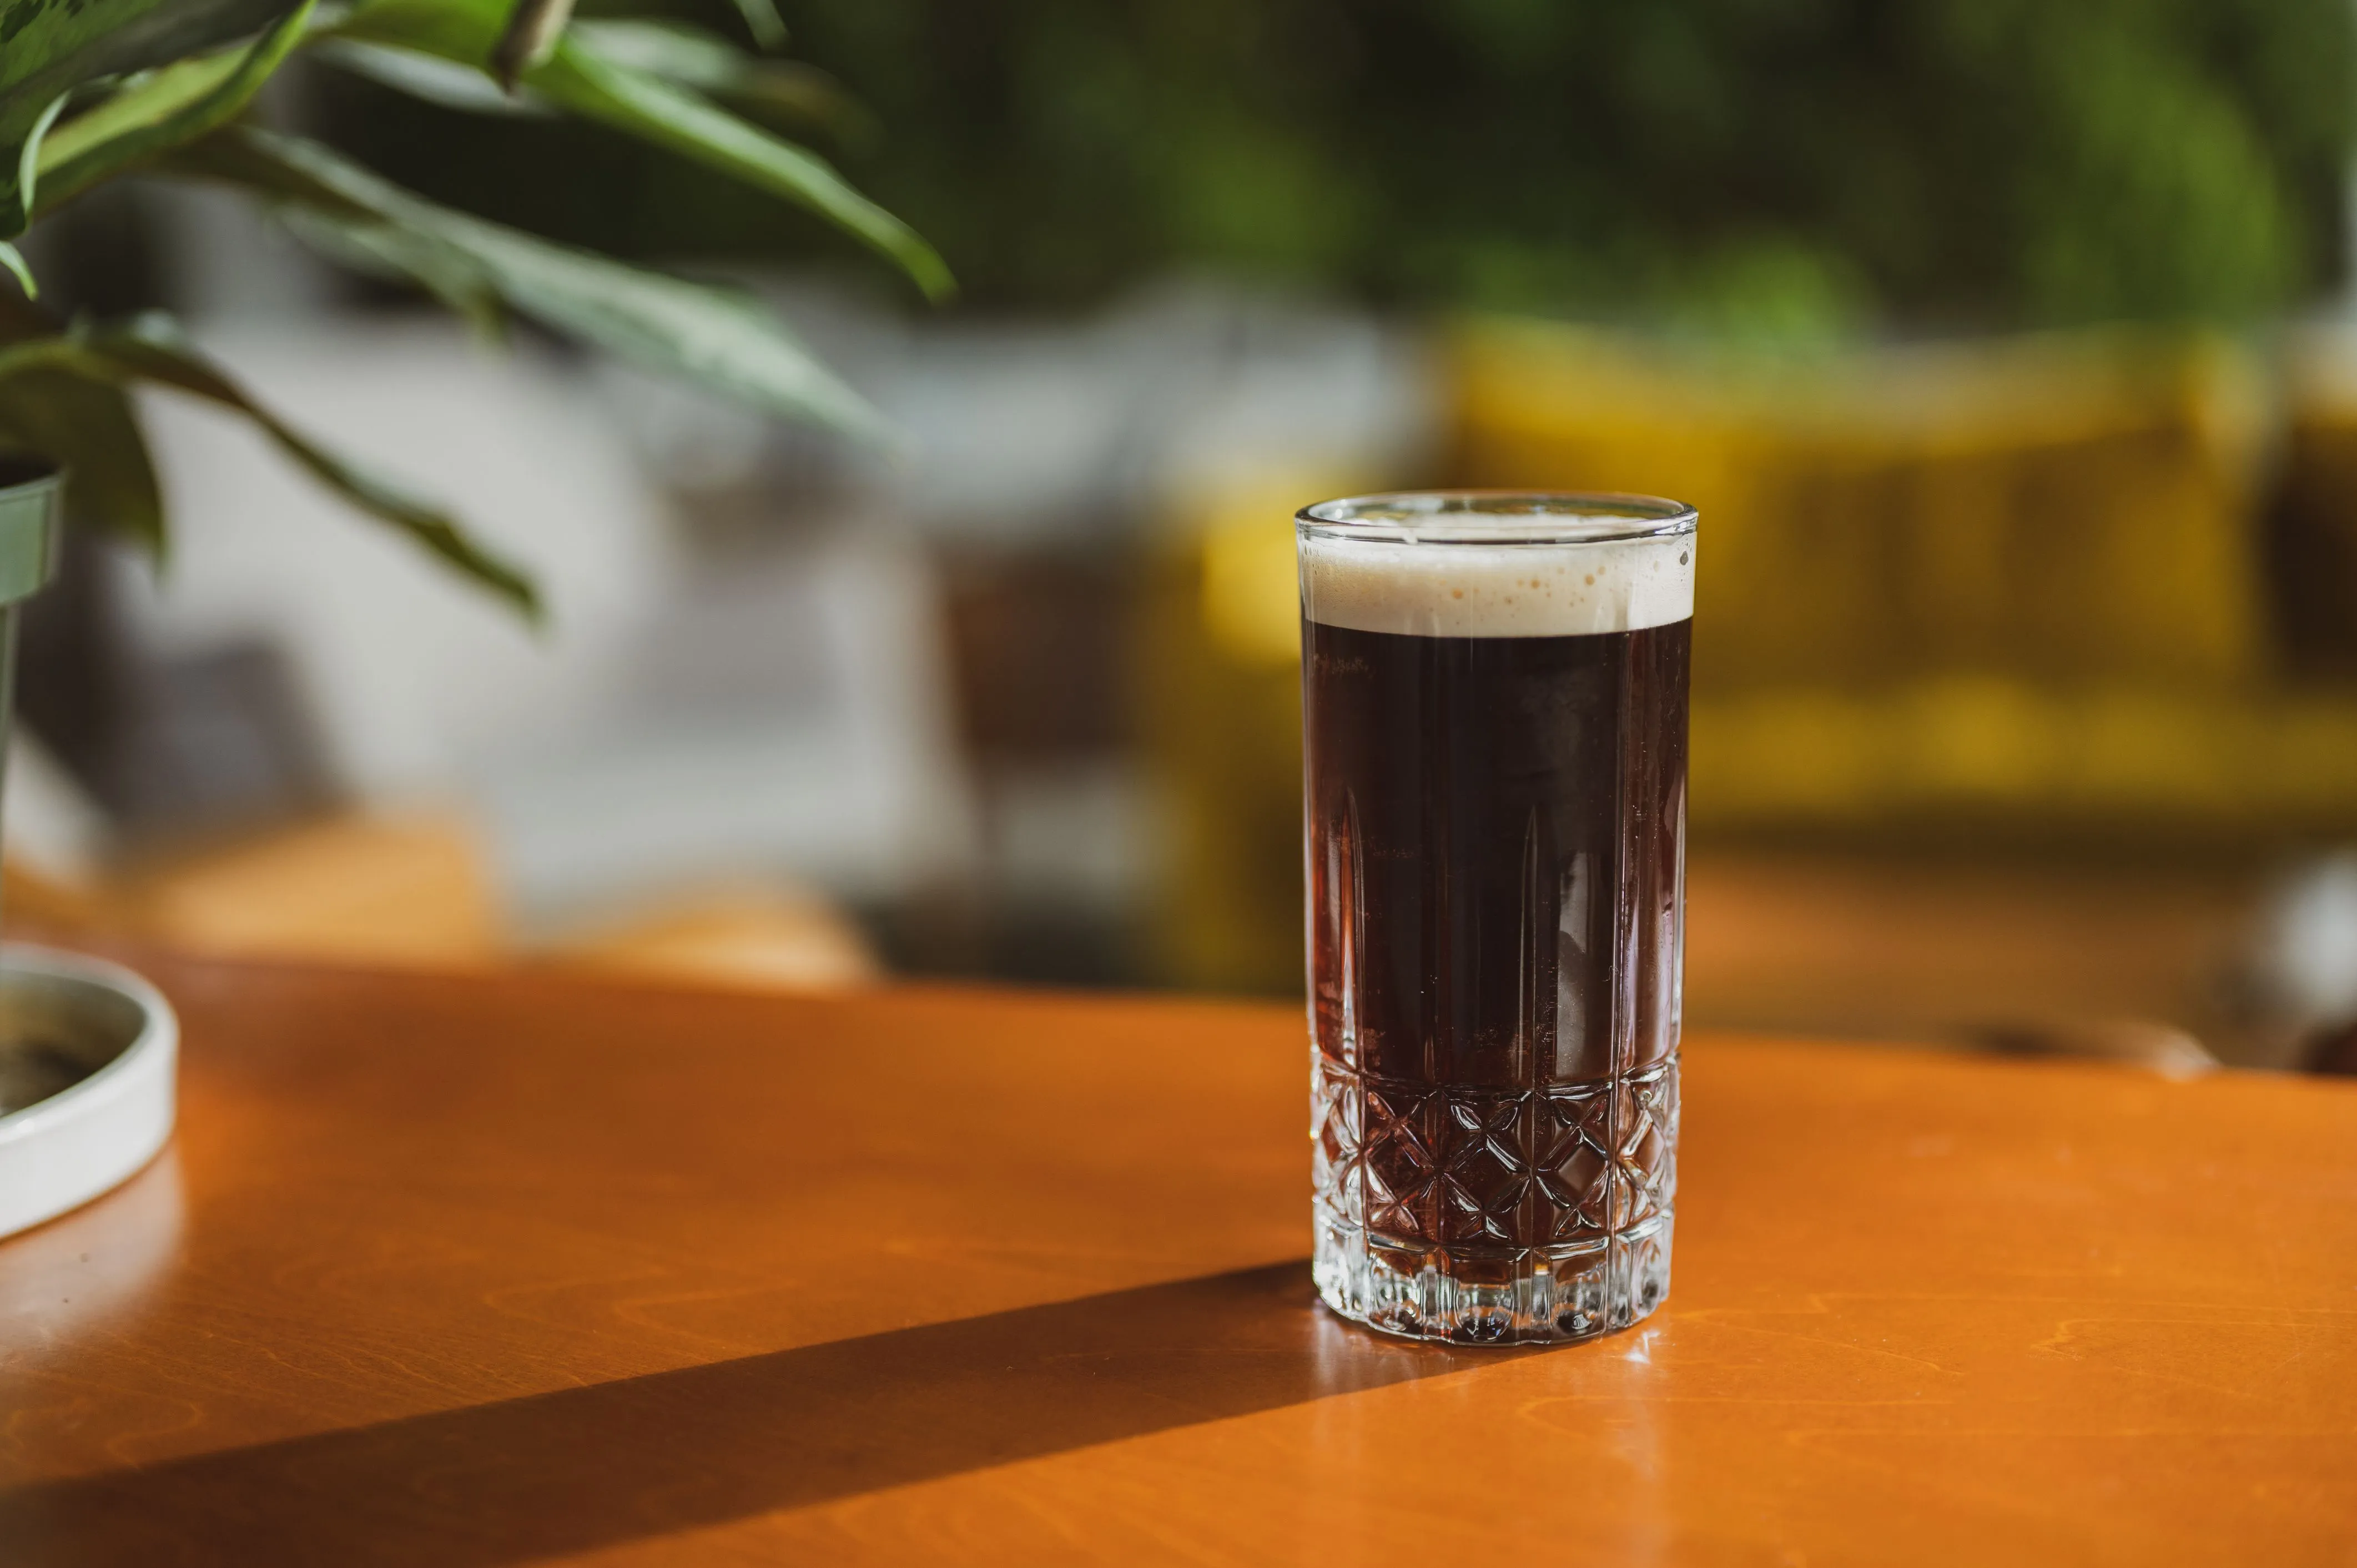 A glass of dark beer with foam on top, sitting on a wooden table with blurred green plants in the background.